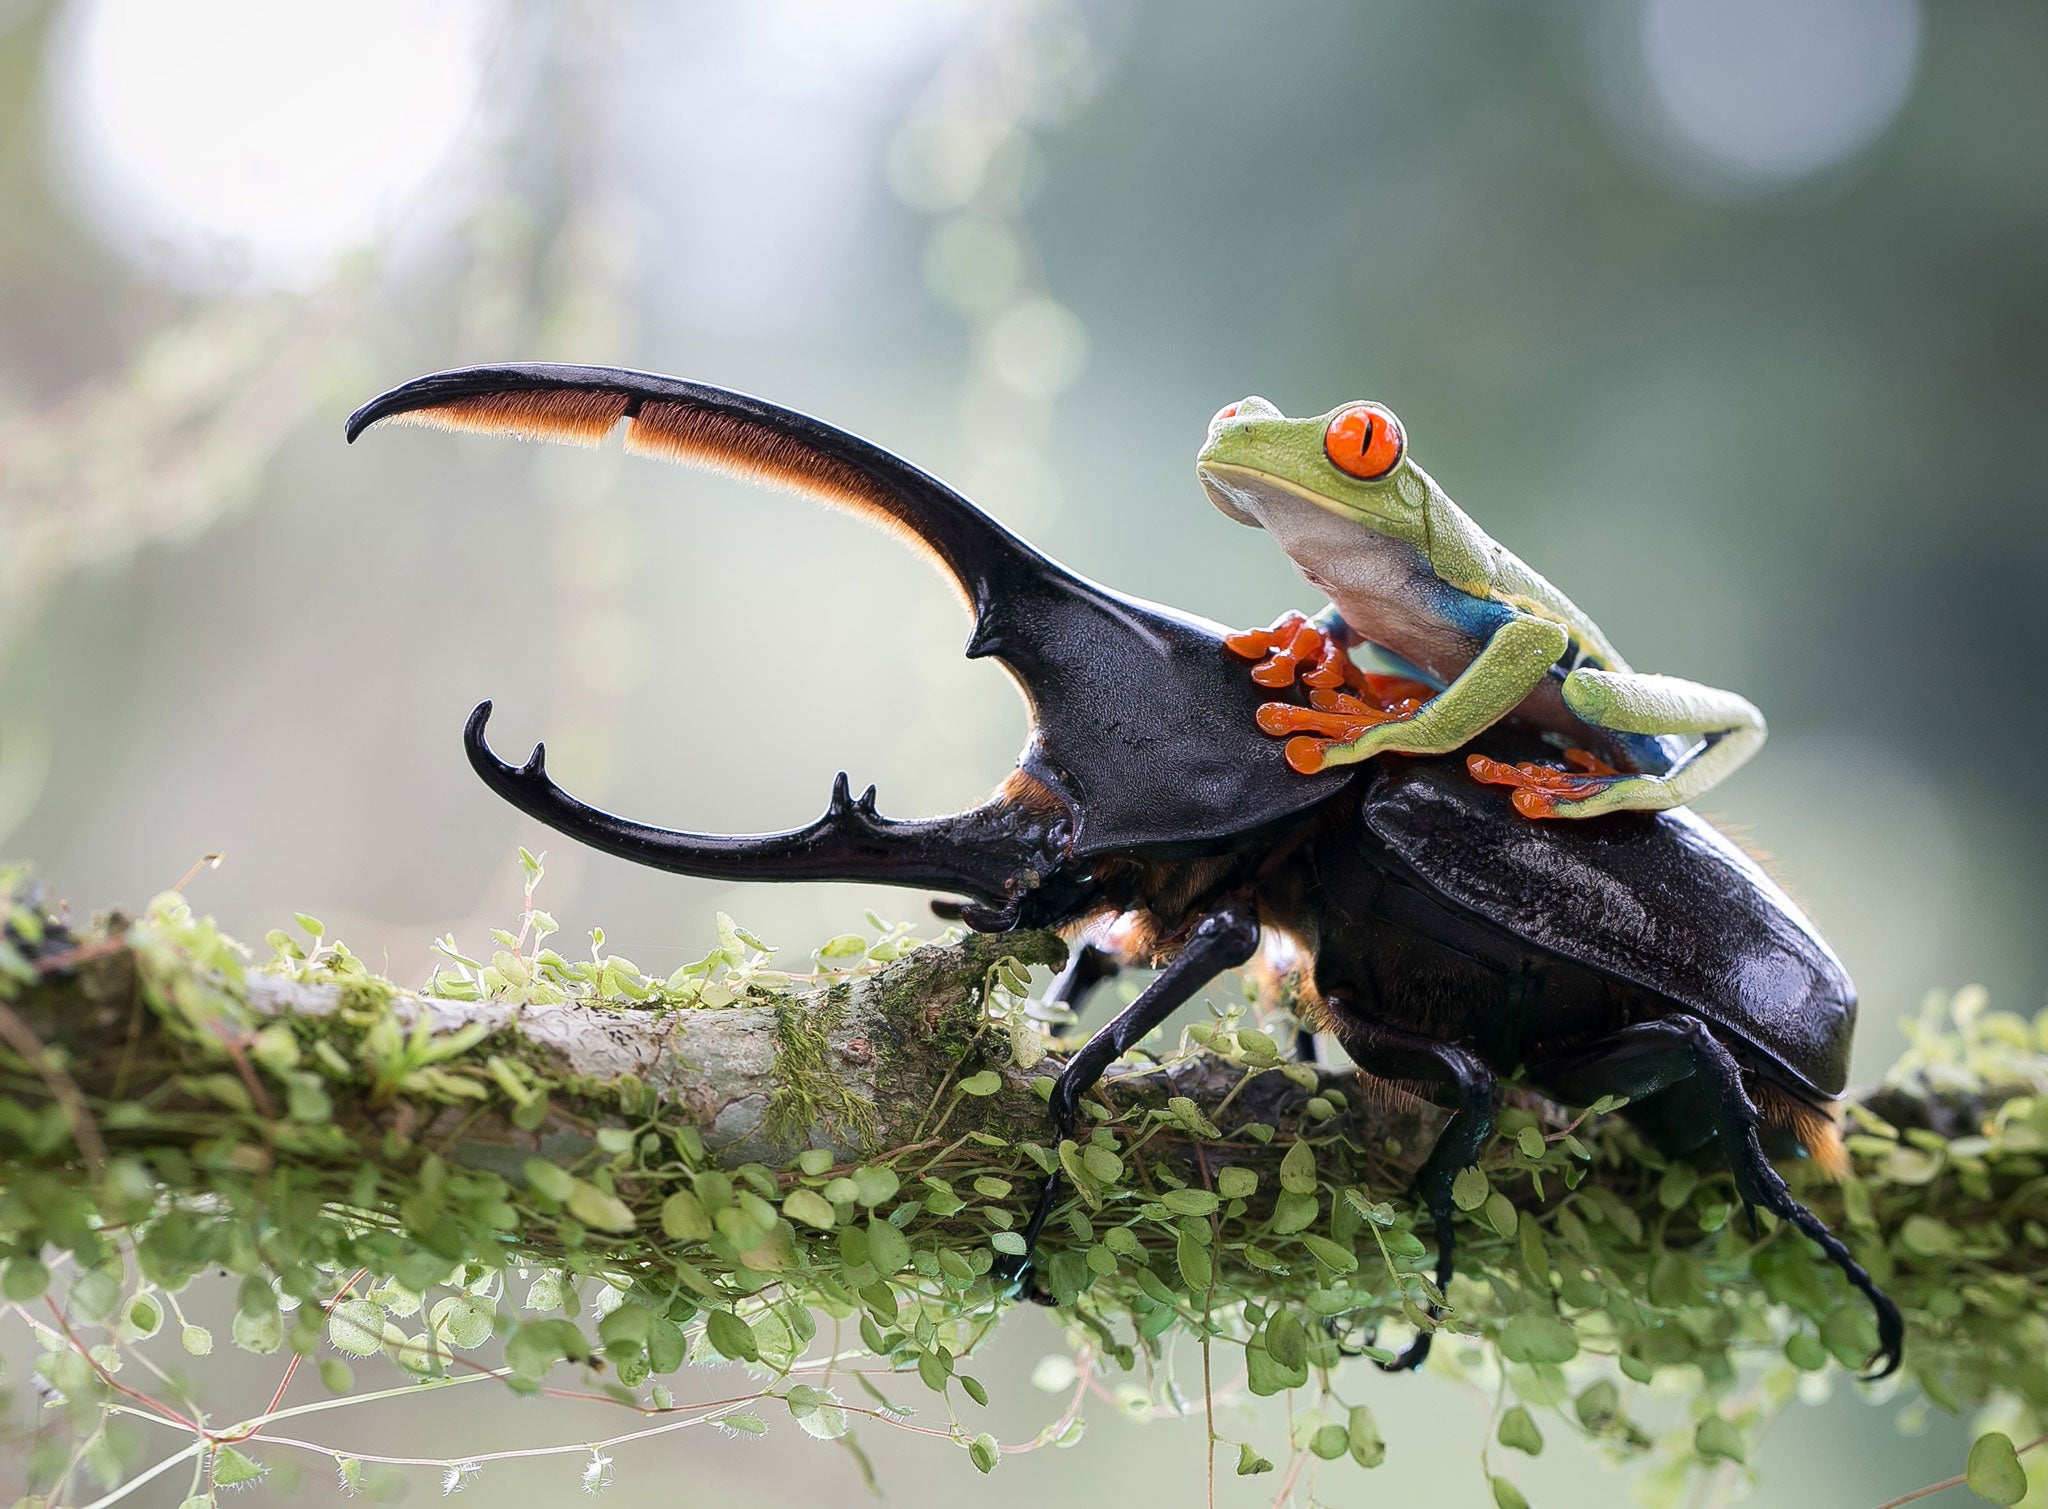 'The Knight and His Steed' by Nicolas Reusens Boden from Sweden, Open Competition, Nature and Wildlife category, 2014 Sony World Photography Awards. This picture was taken in a natural but controlled environment. A tree frog managed to jump to a branch wh